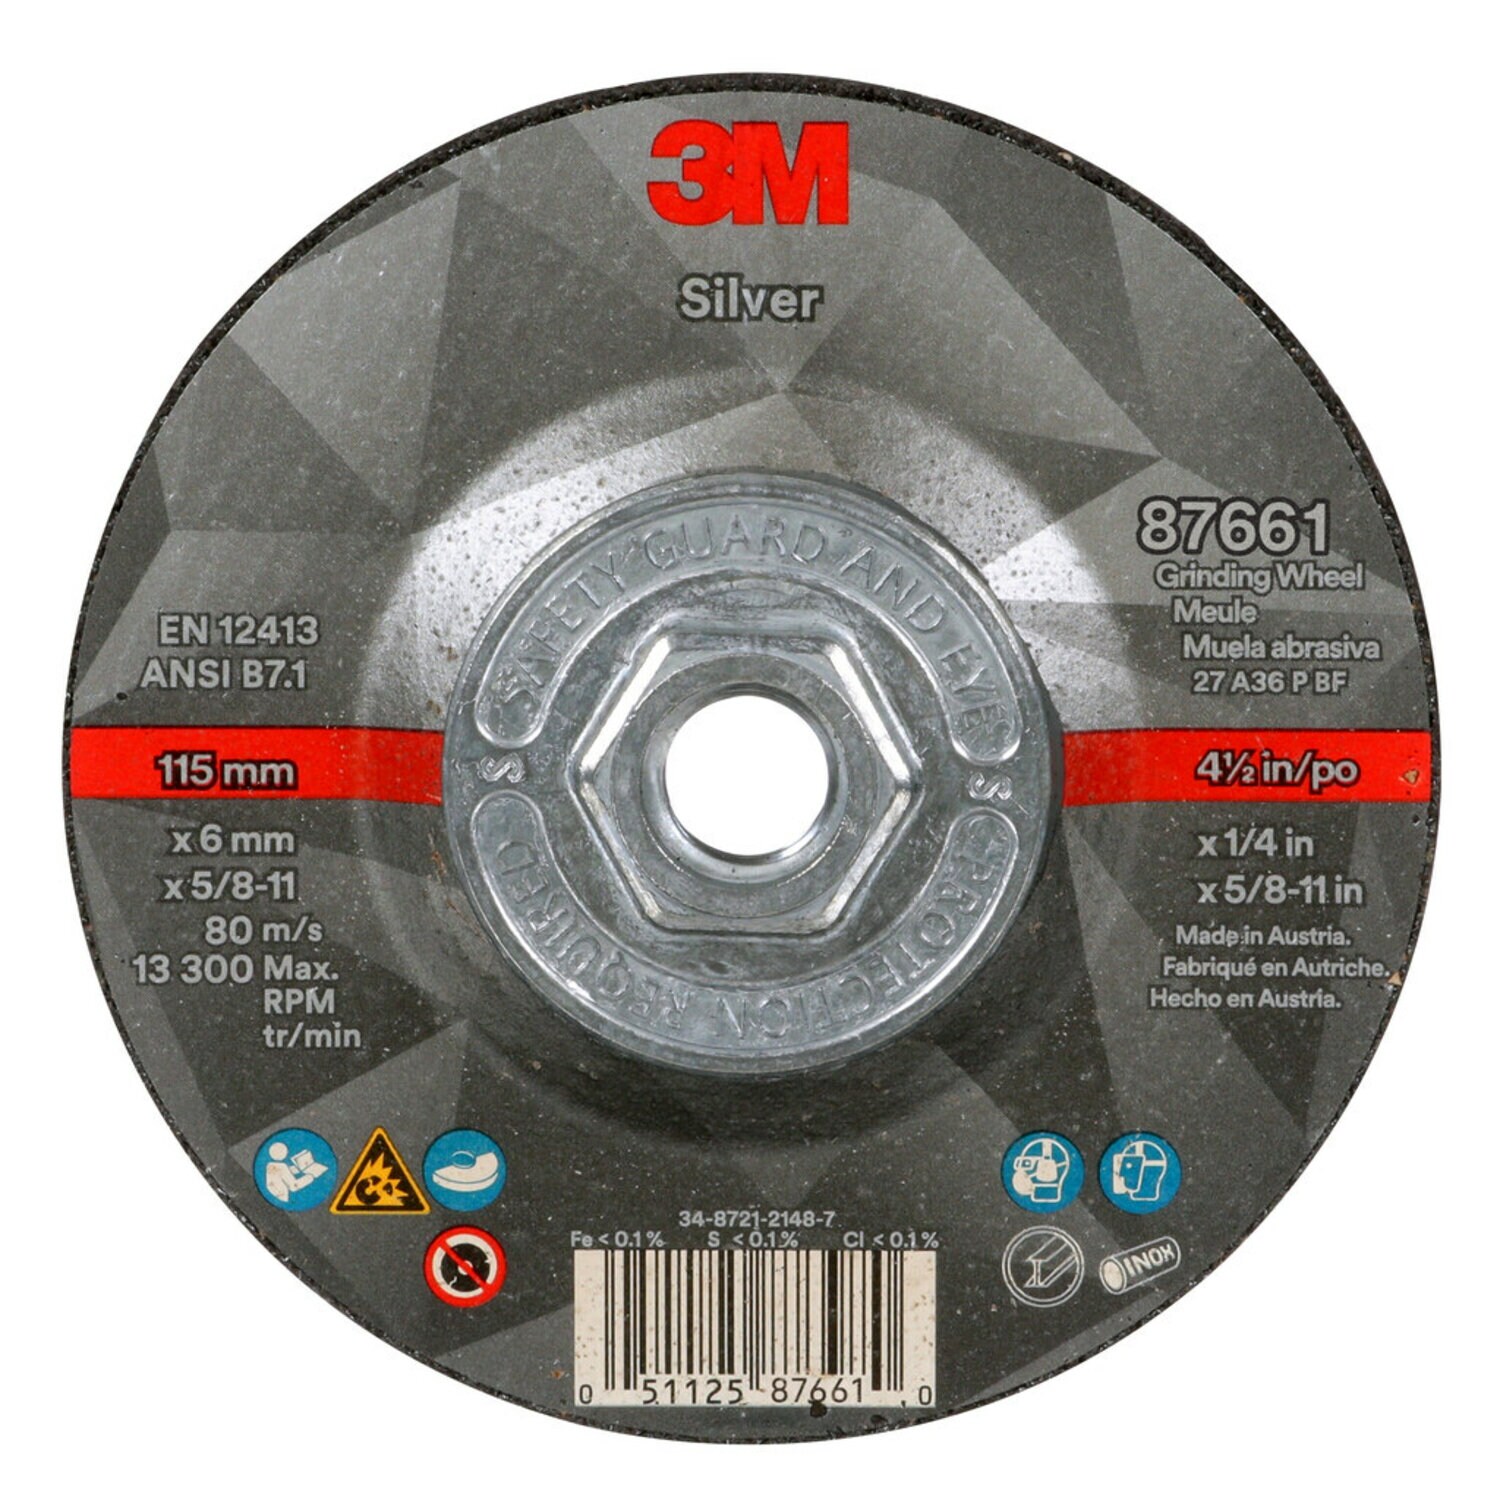 7100256472 - 3M Silver Depressed Center Grinding Wheel, 87661, T27 Quick Change, 4.5
in x 1/4 in x 5/8-11 in, Single Pack, 10 ea/Case